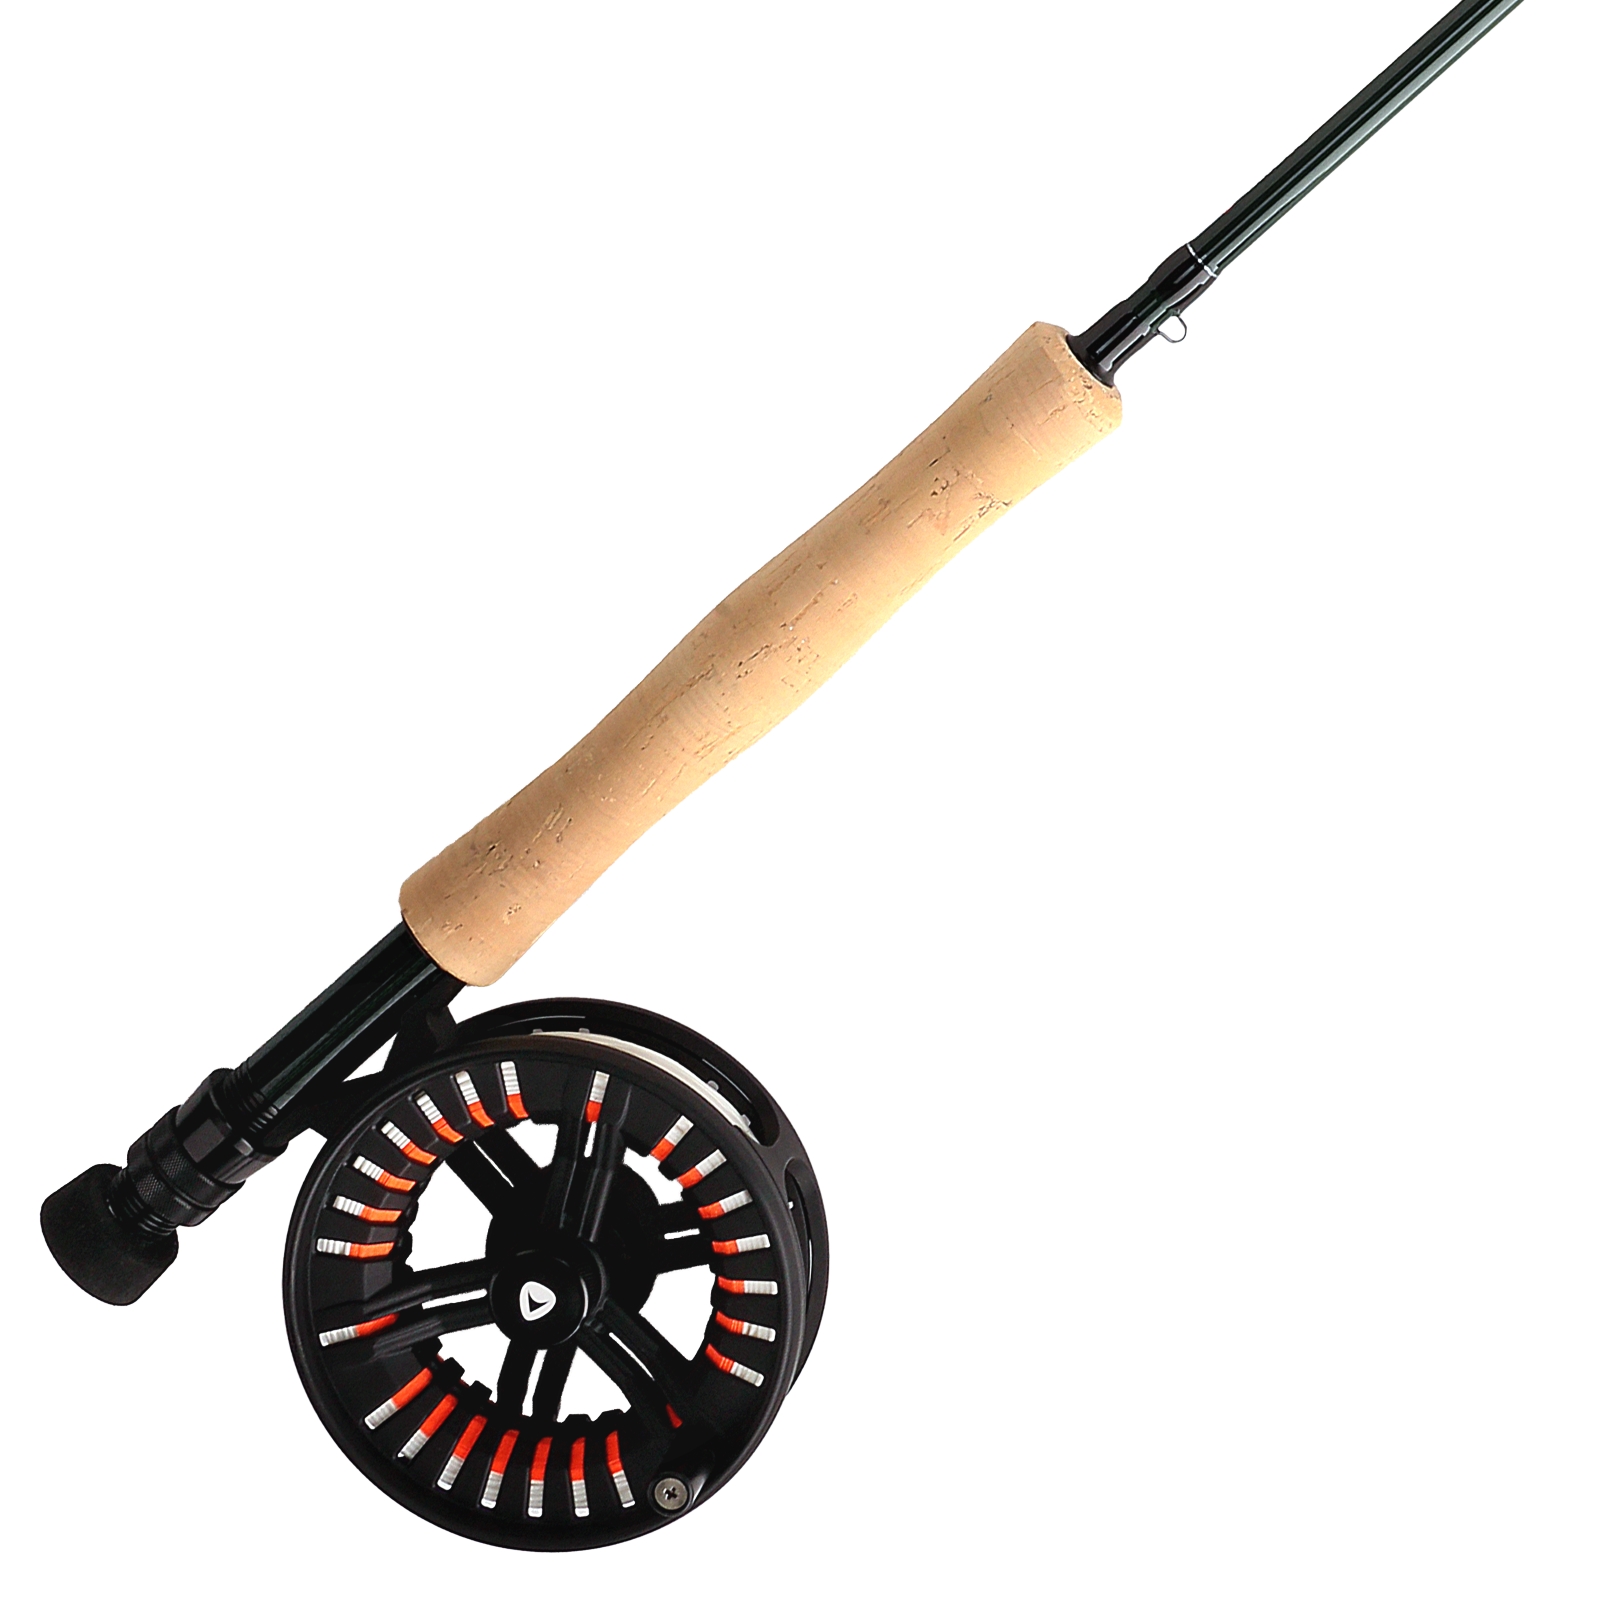 The NEW Cruise Fly Reel and Combo from Greys Fly Fishing